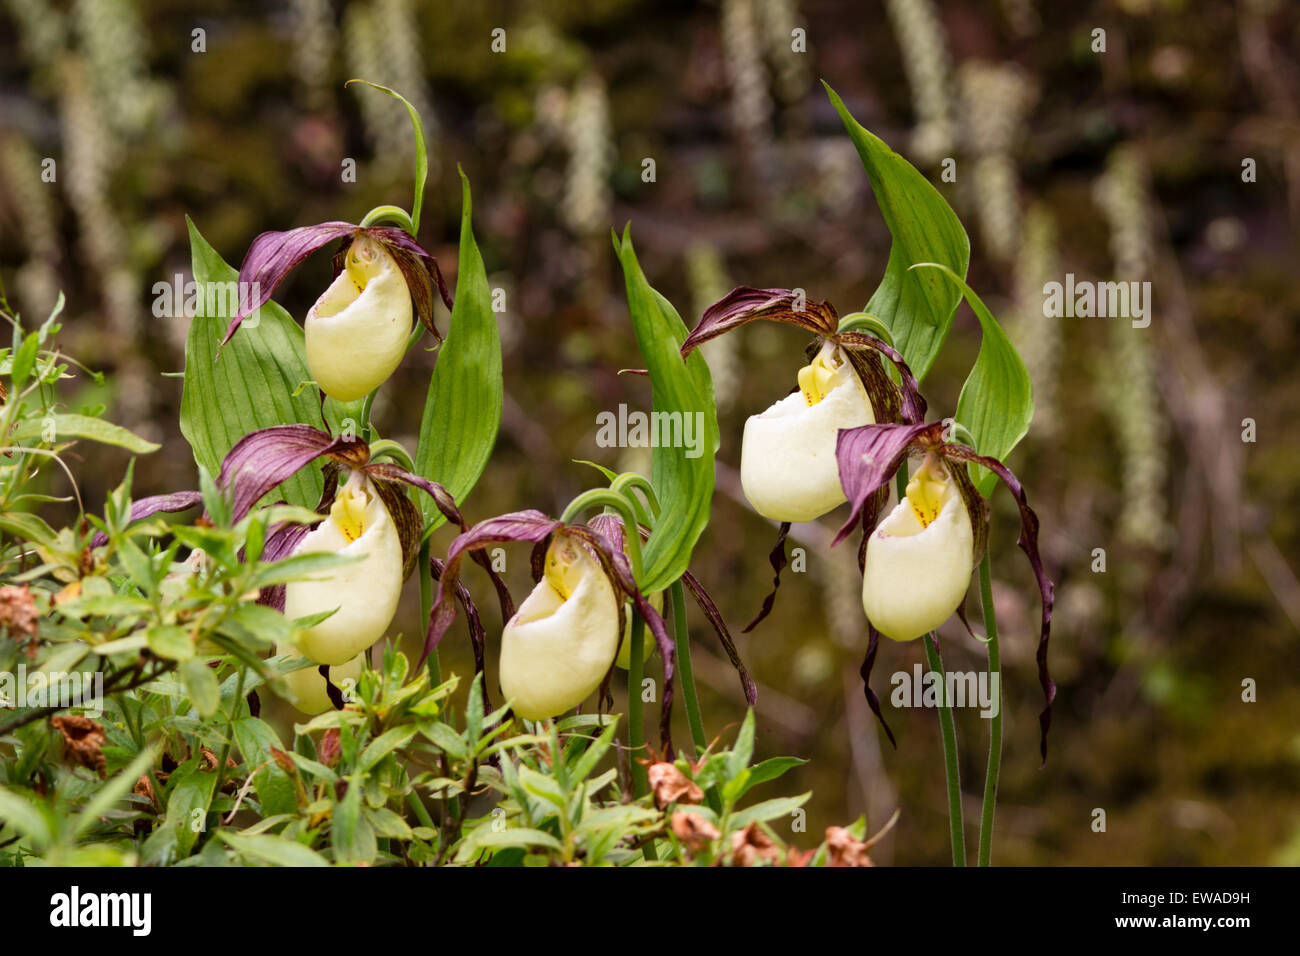 Exotic brown and white pouched blooms of the Lady's slipper orchid, Cypripedium kentuckiense Stock Photo